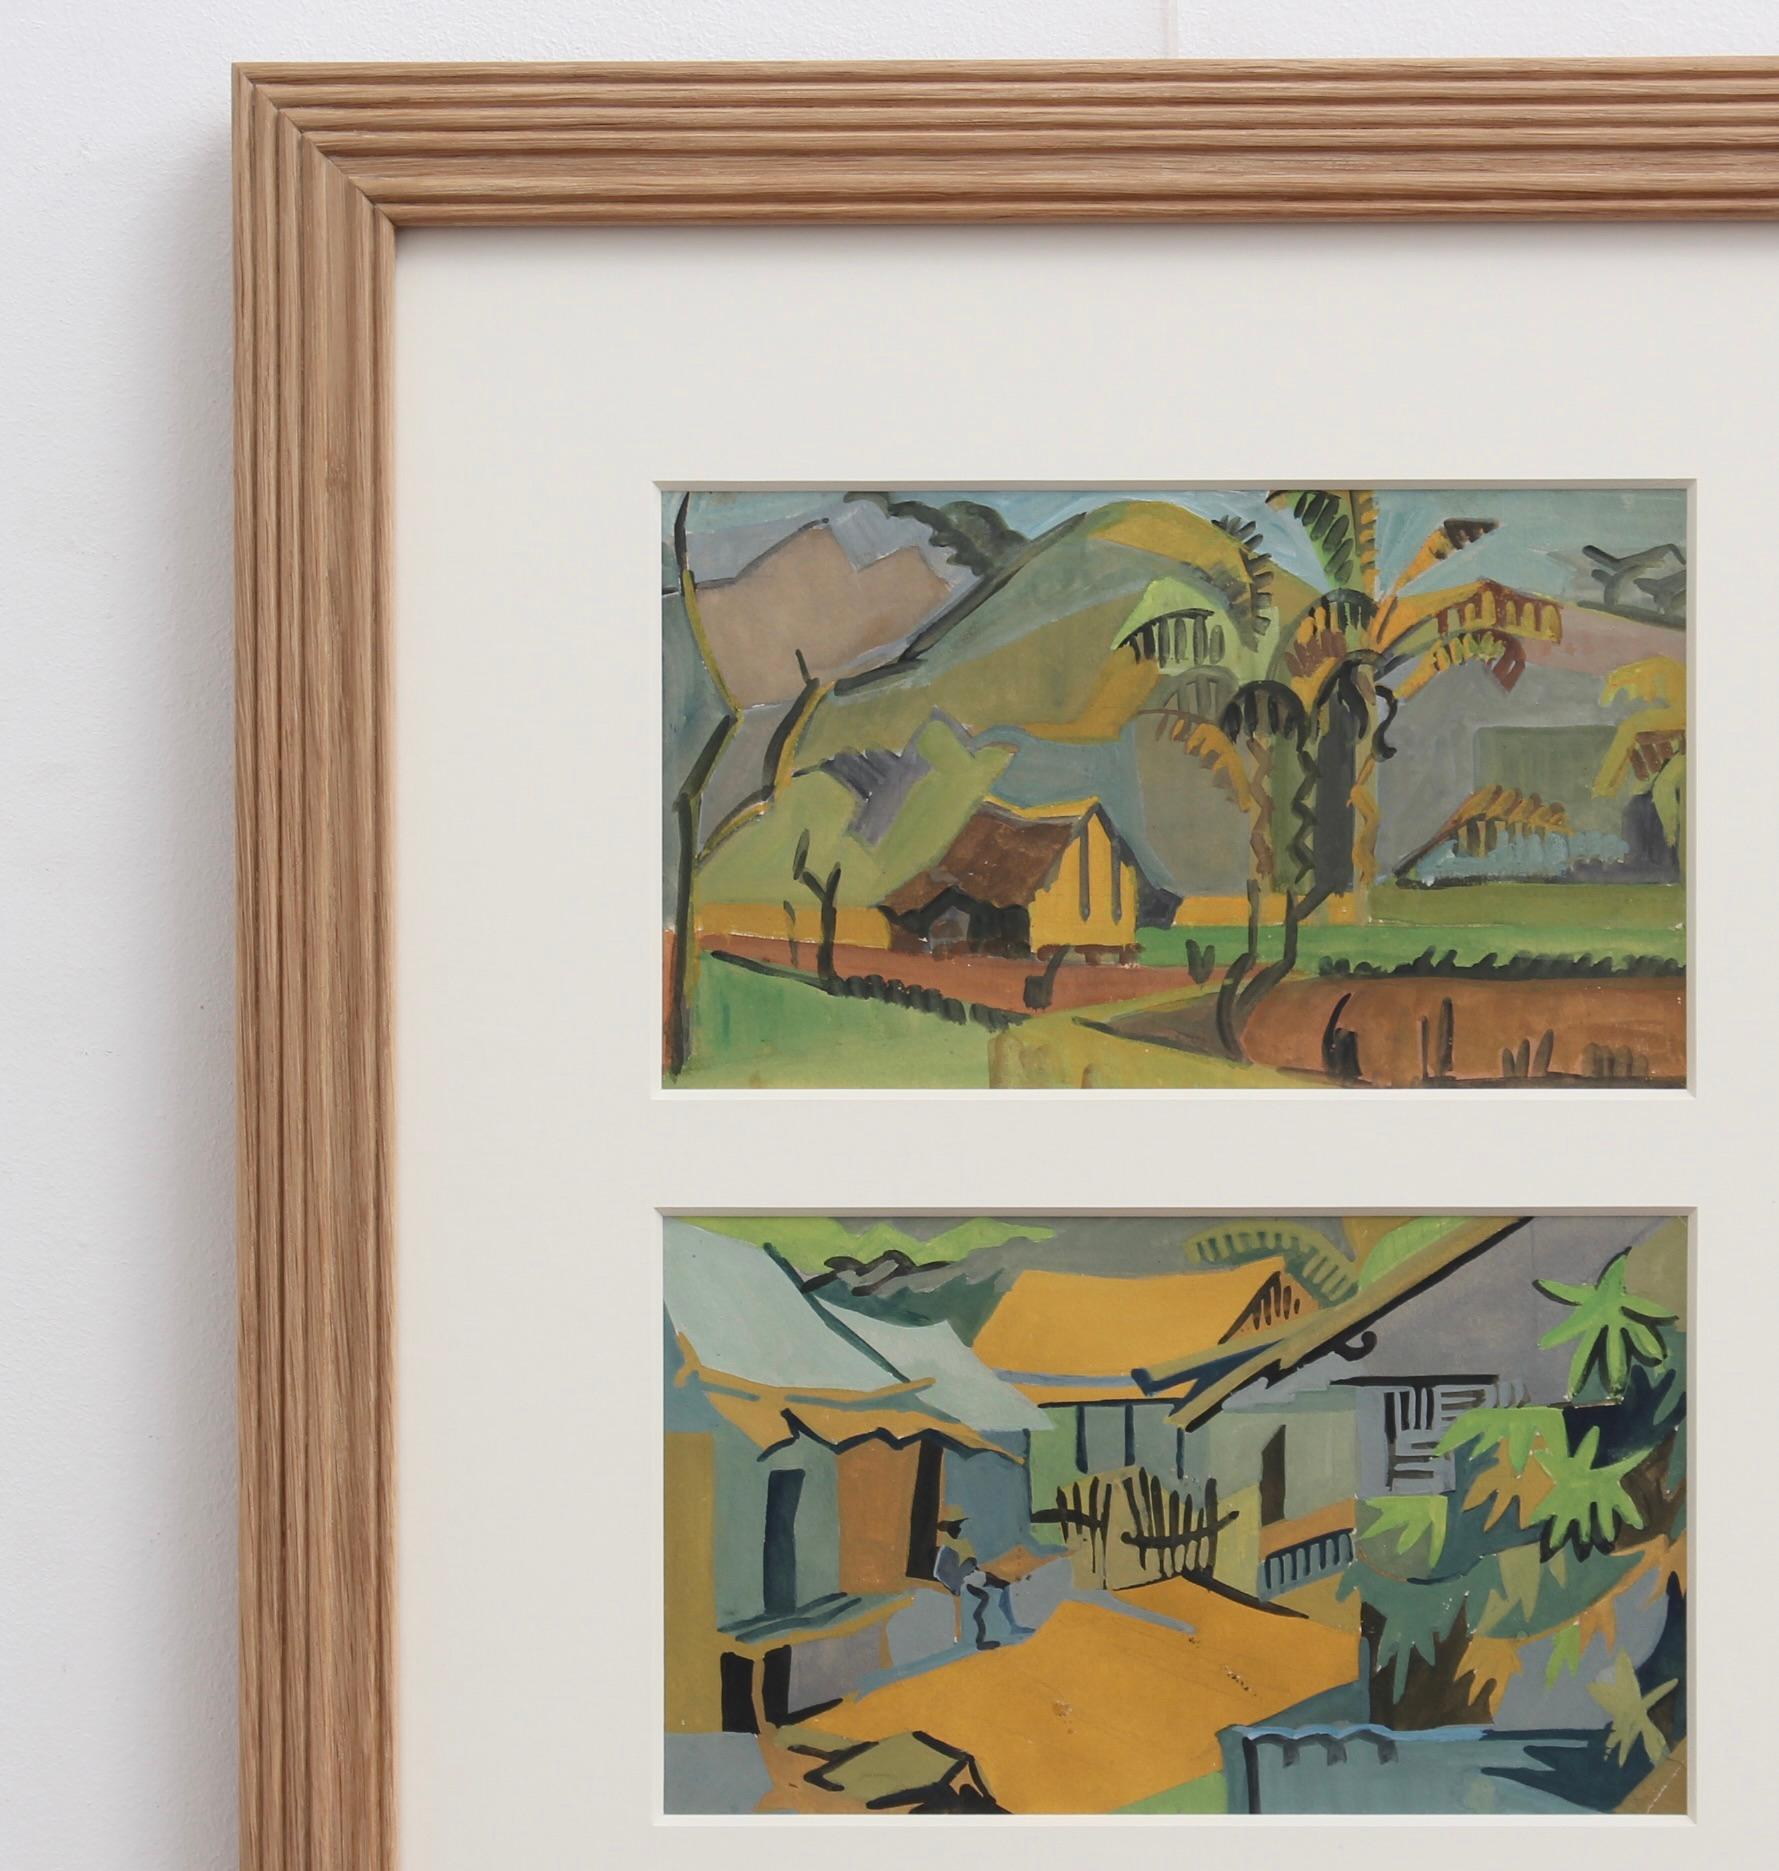 'Views of Madagascar', gouache on paper, French School (circa 1960s). The artist depicts two views of Madagascar in a charming and naive style. The first, a farm and its fields with a significant verdant elevation in the background. The second, a